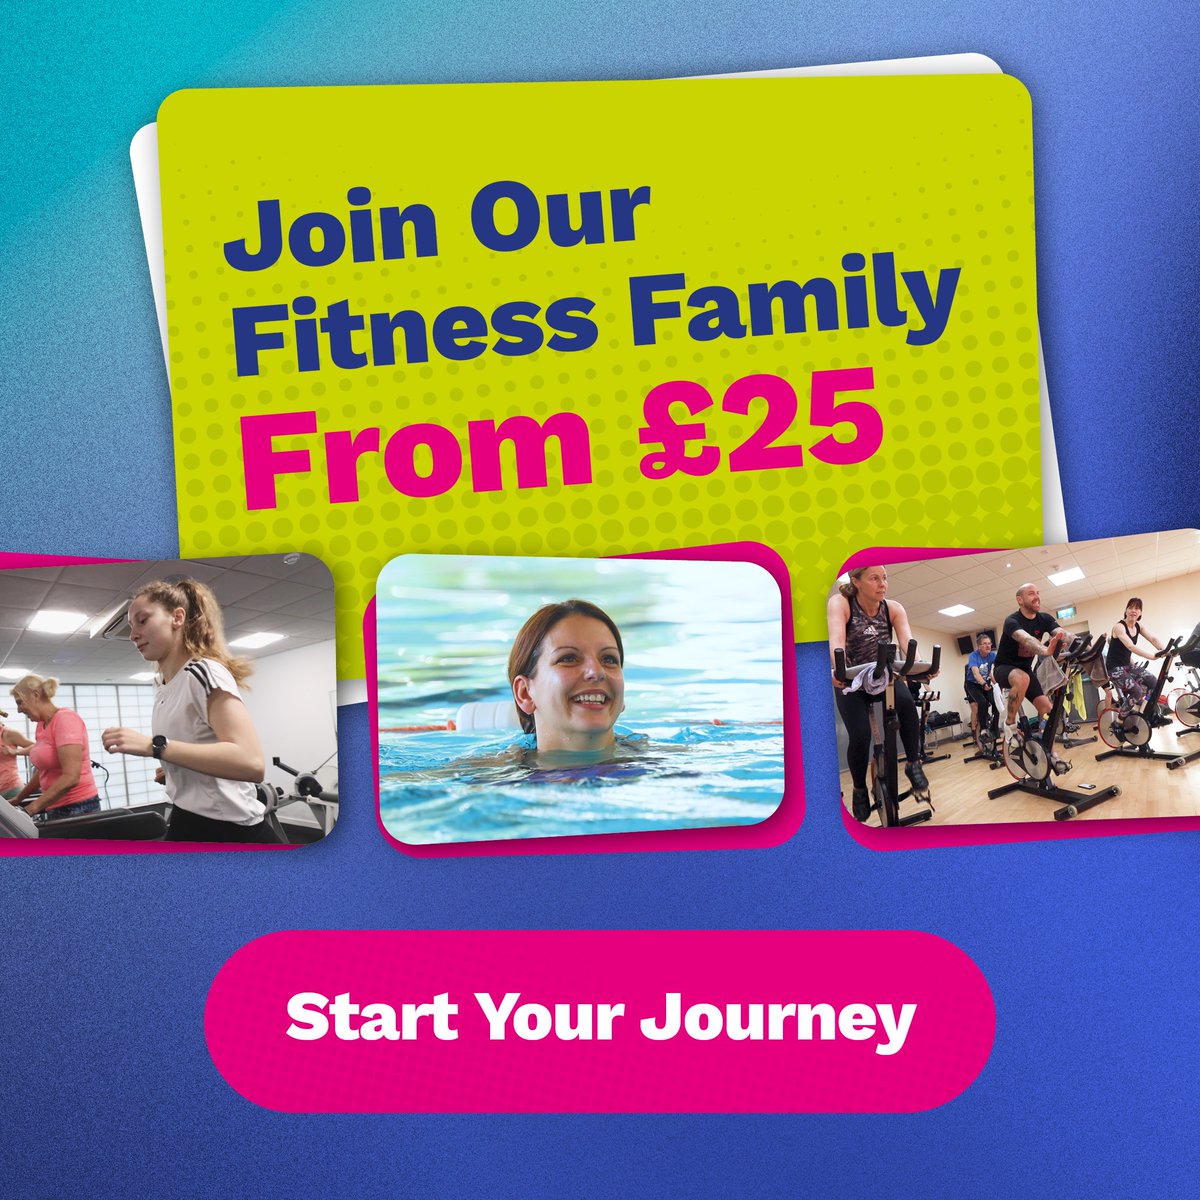 Join Lincs Inspire today from only £25 per month and enjoy exclusive perks: 🏋️‍♀️ 4 fantastic gyms in North East Lincolnshire 🏊‍♂️ Dive into unlimited pool access 🧘‍♀️ Fitness classes at your convenience 🚫 Cancel anytime Sign up today 👇 lincsinspire.com/fitness-family